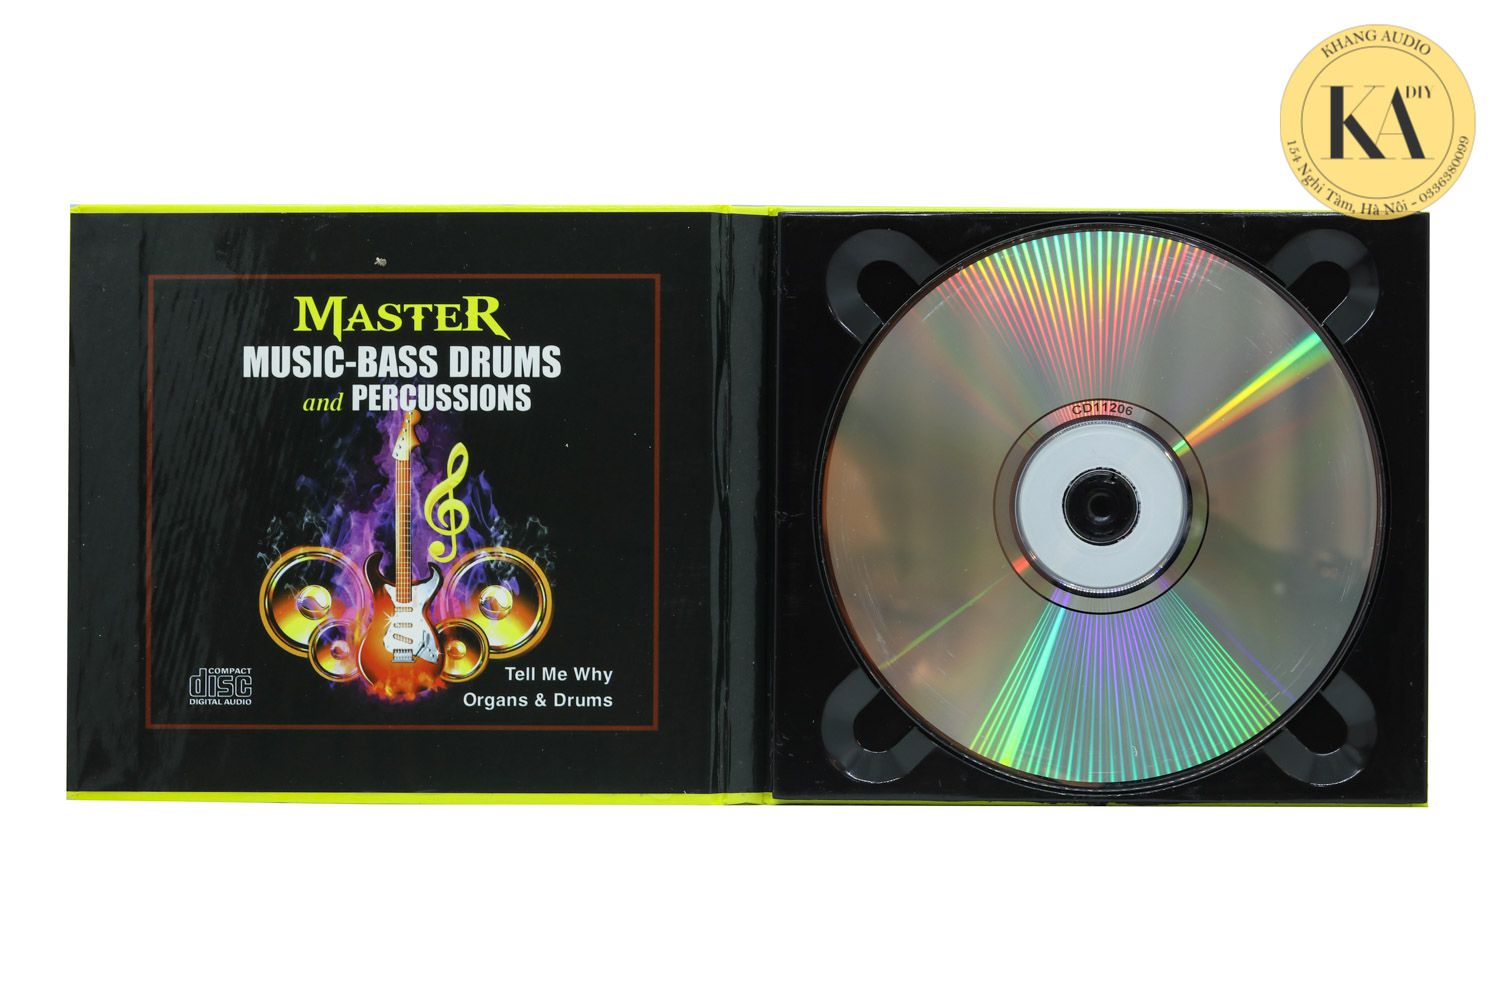 Master Music-Bass Drums And Percussions Khang Audio 0336380099